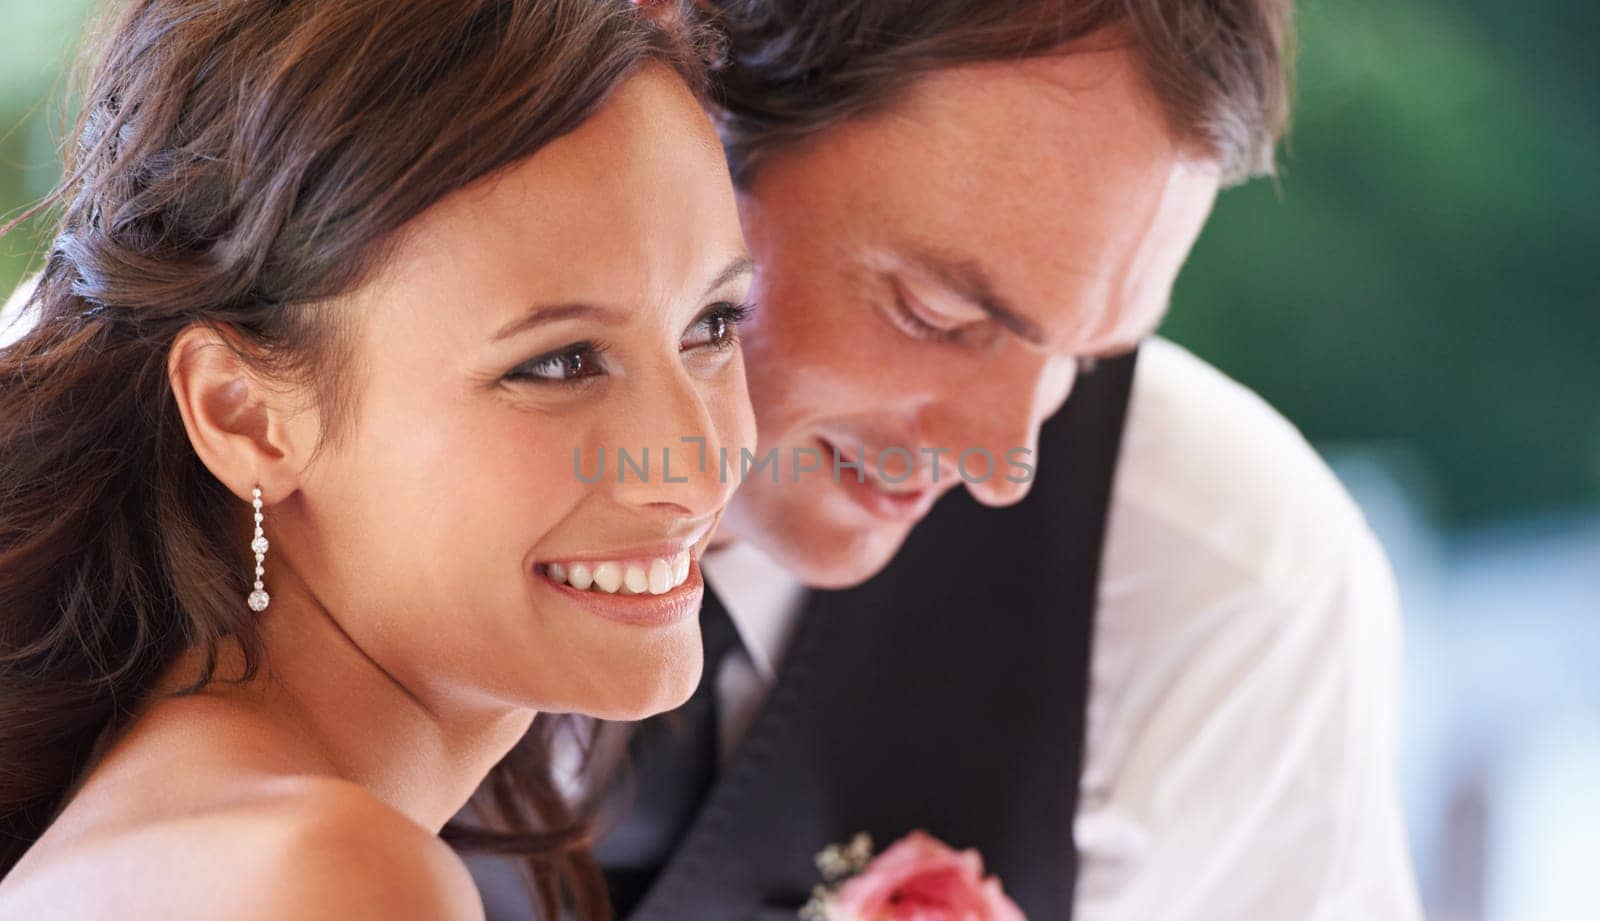 Couple, smile and love on wedding ceremony in outdoors, together and excited for marriage and commitment. Happy couple, romance and union at celebration, loyalty and pride for fashion and partnership.